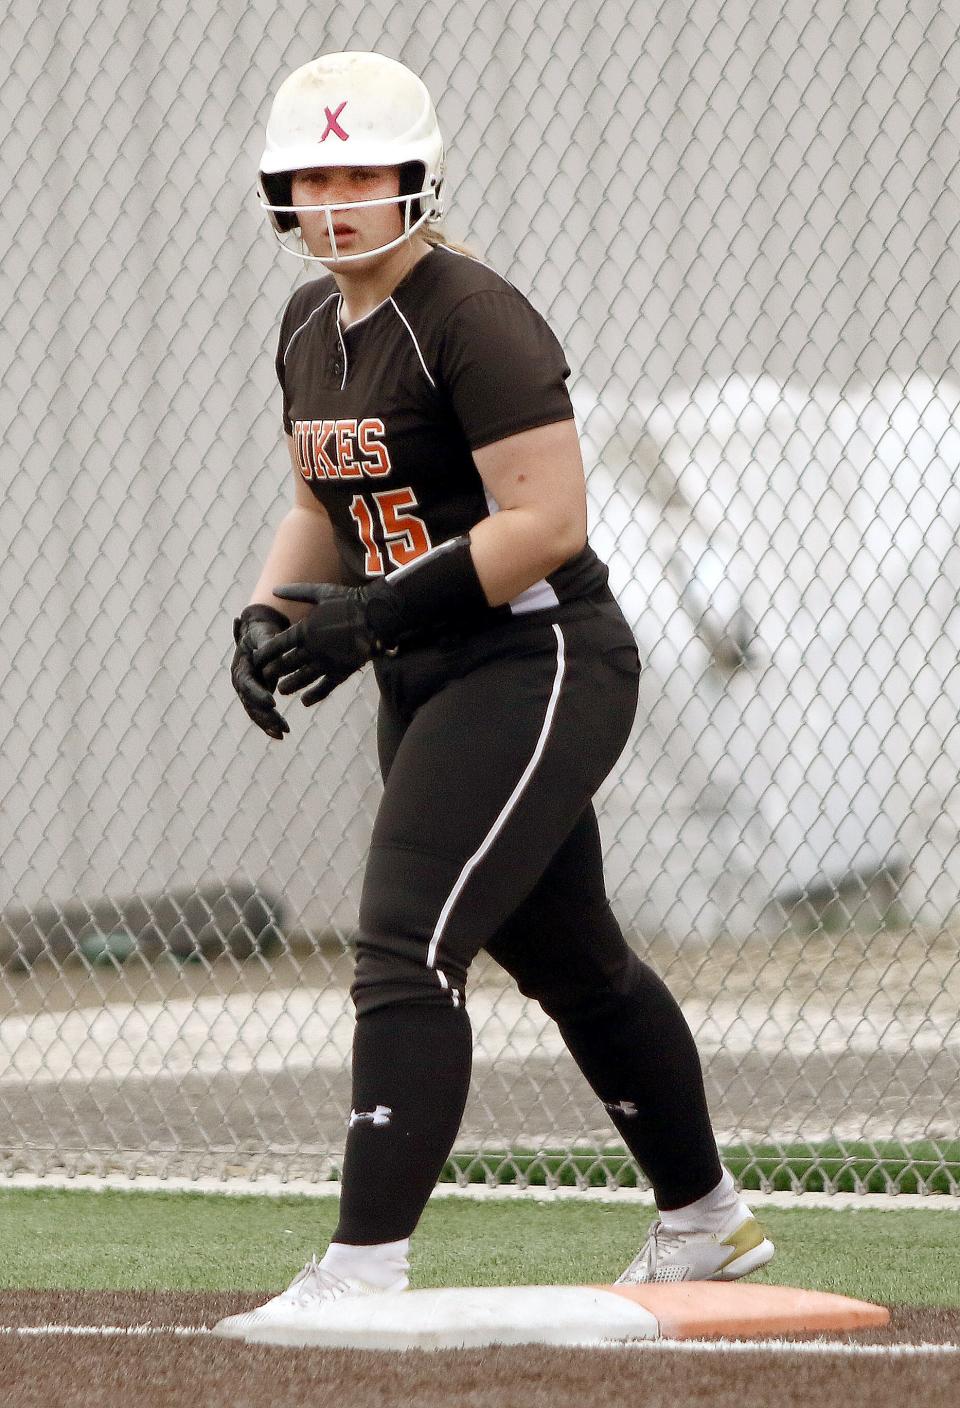 Marlington's Emma Jackson had two singles and a solo home run in Wednesday's win over Grant County.